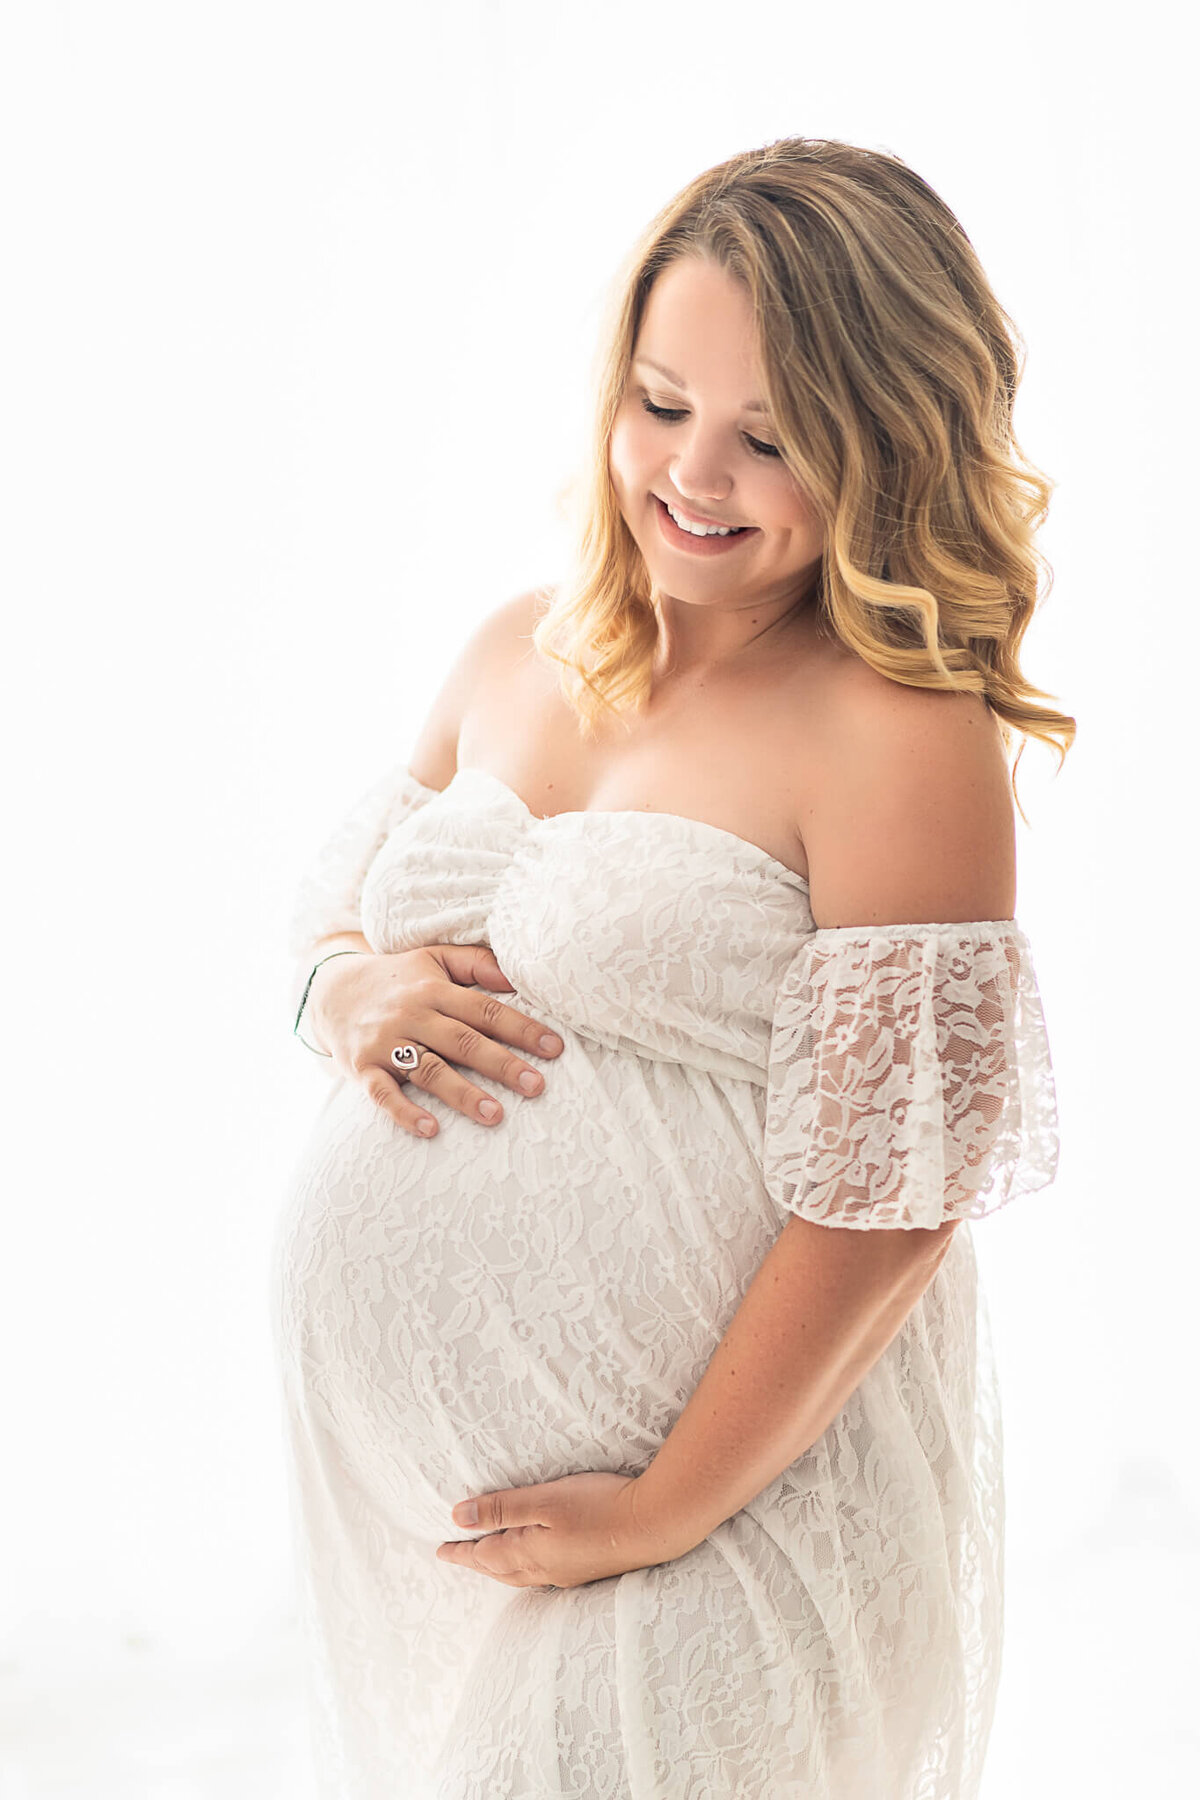 Backlit in studio maternity with mom in beautiful white gown.